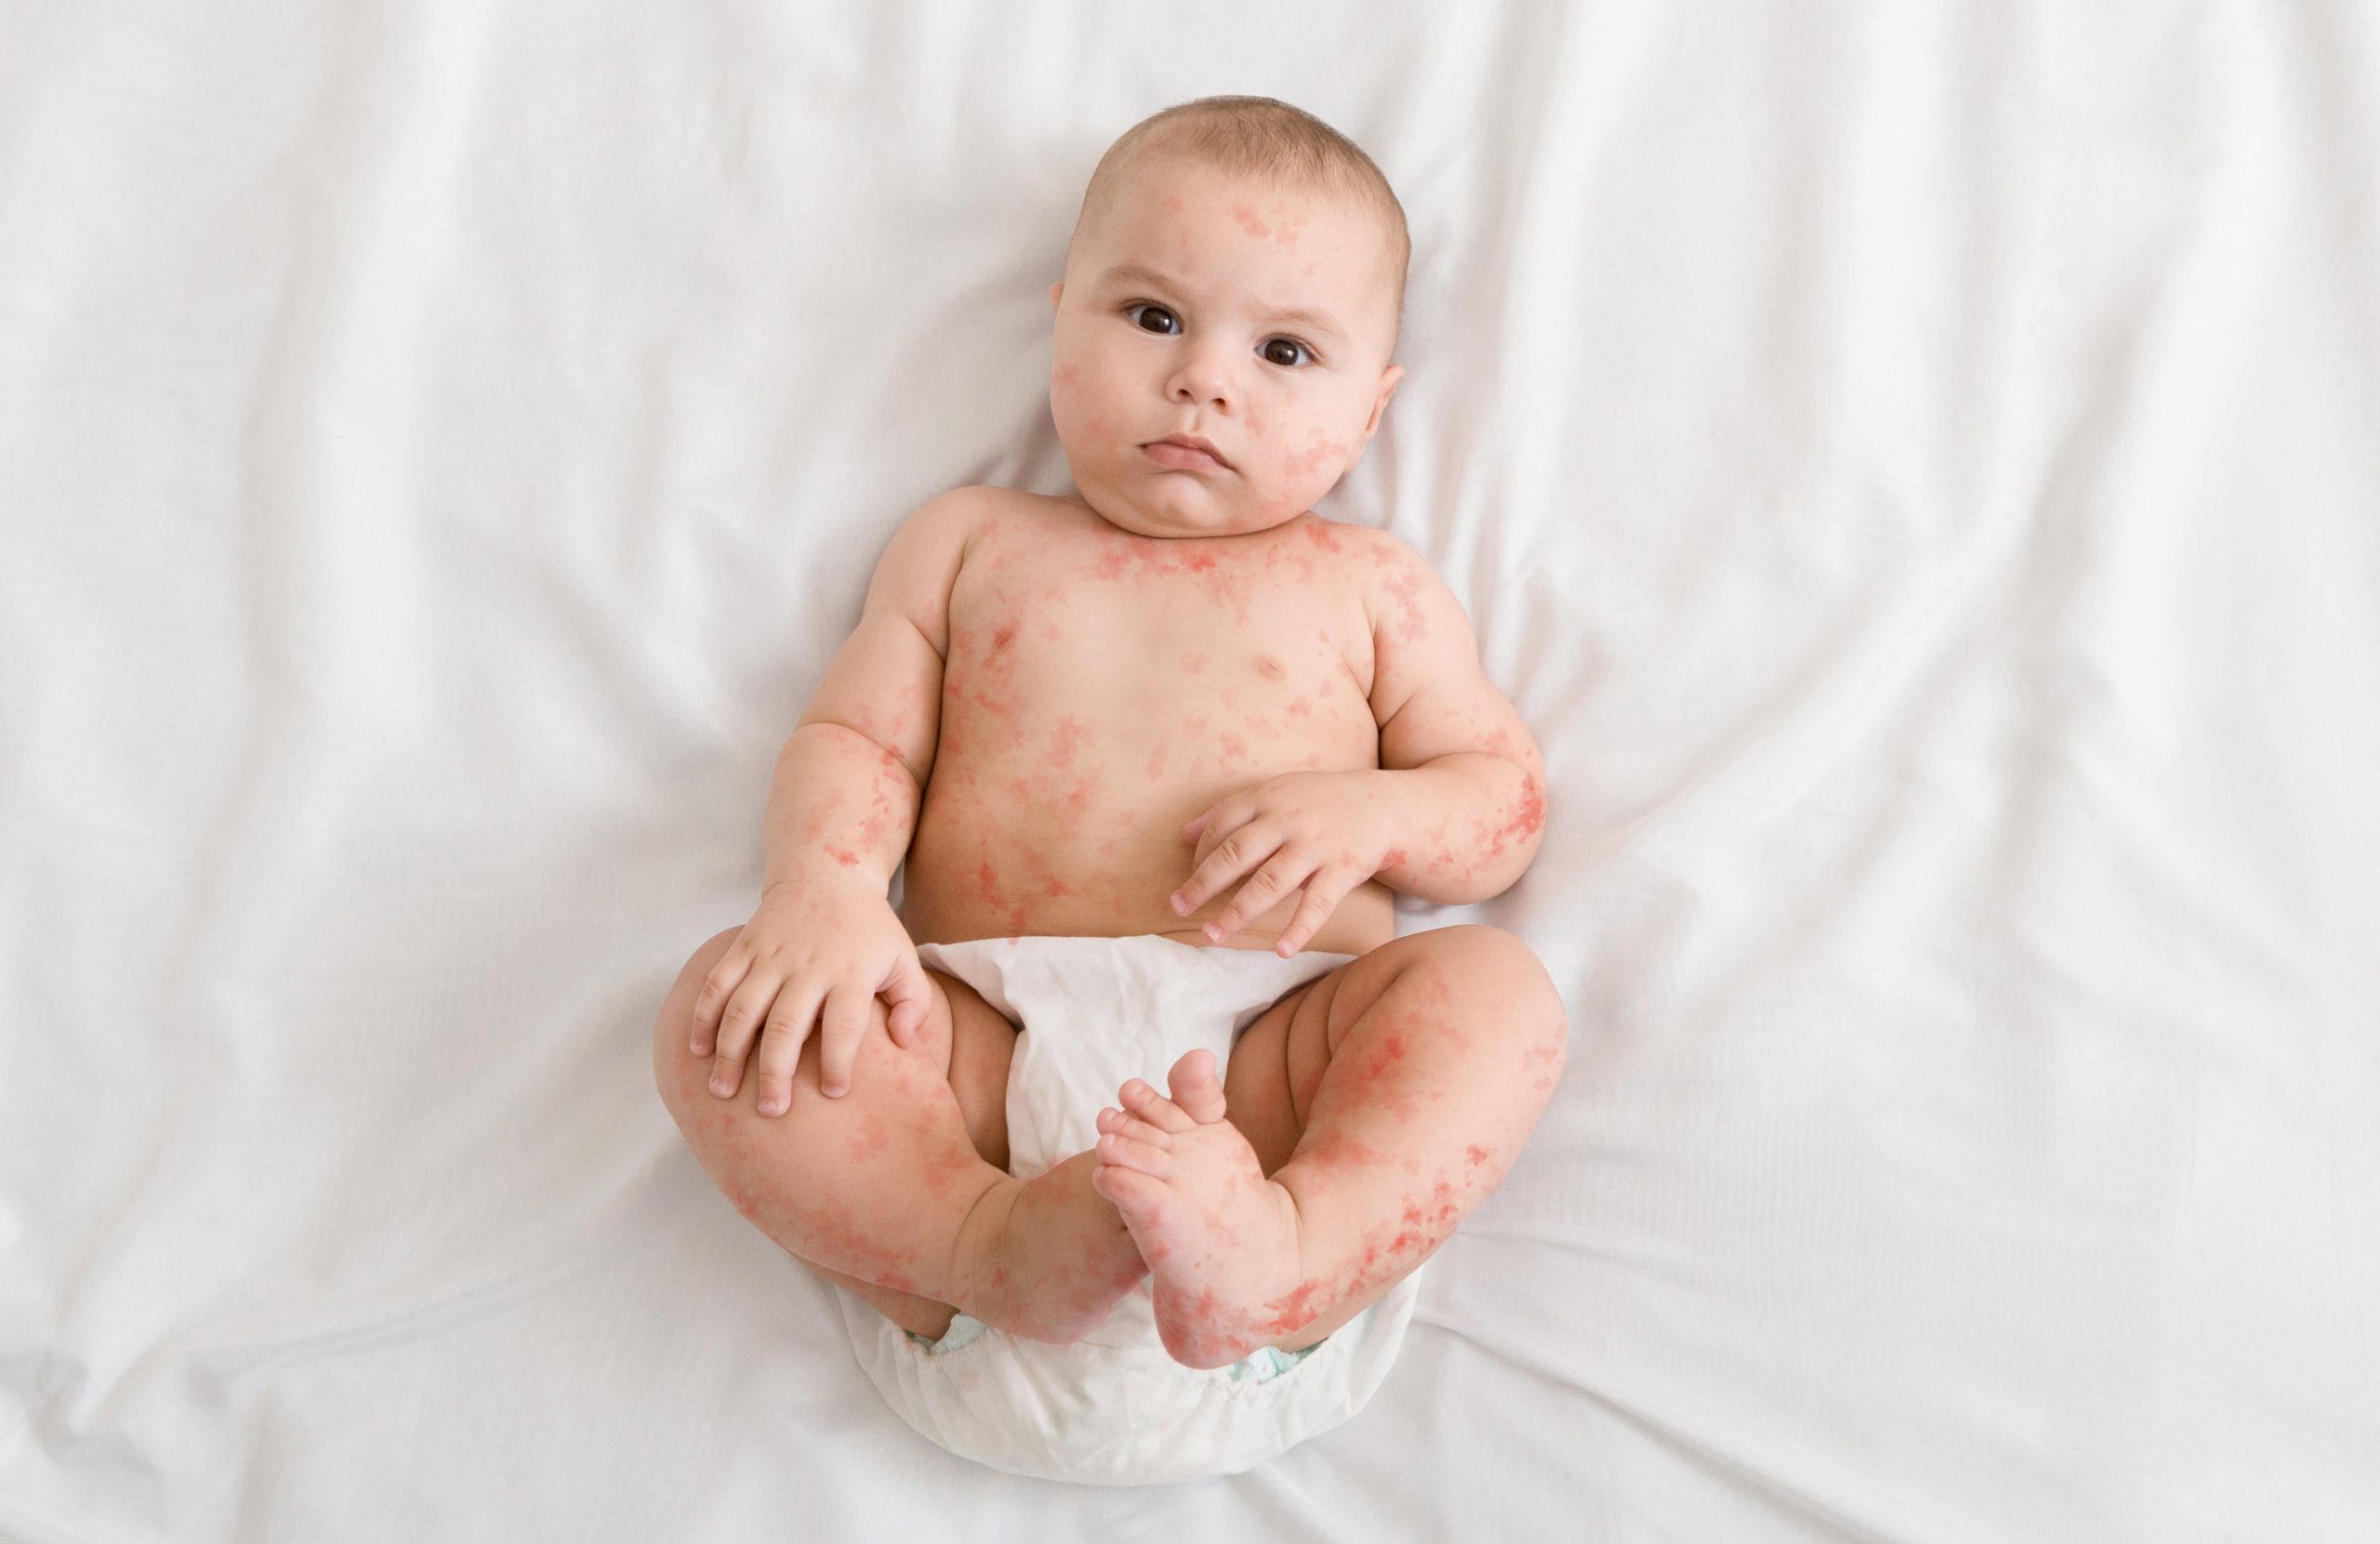 Upset baby with measles rash